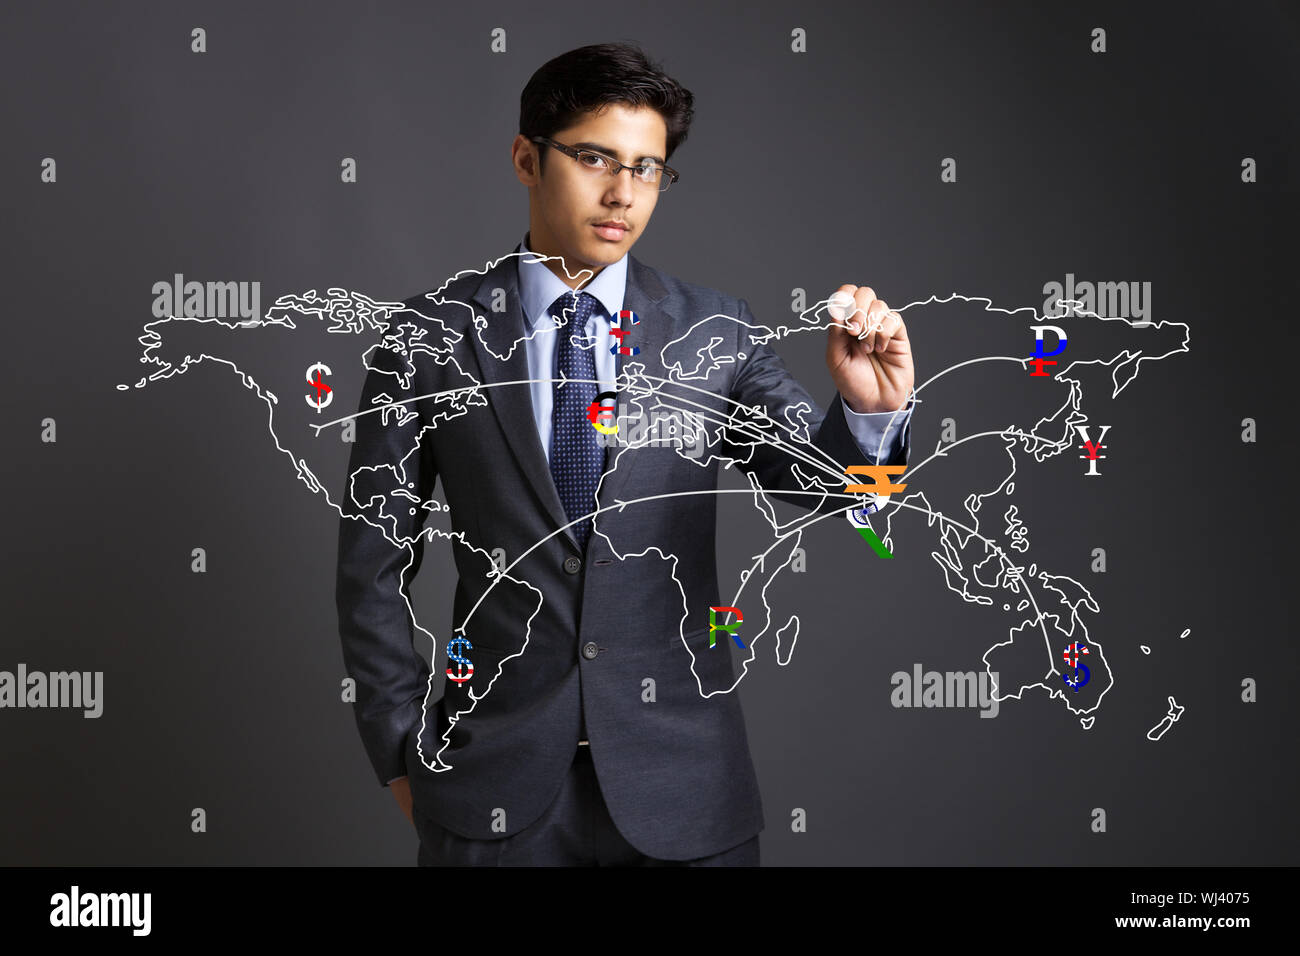 Businessman touching currency symbols on a touch screen representing countries in a world map Stock Photo